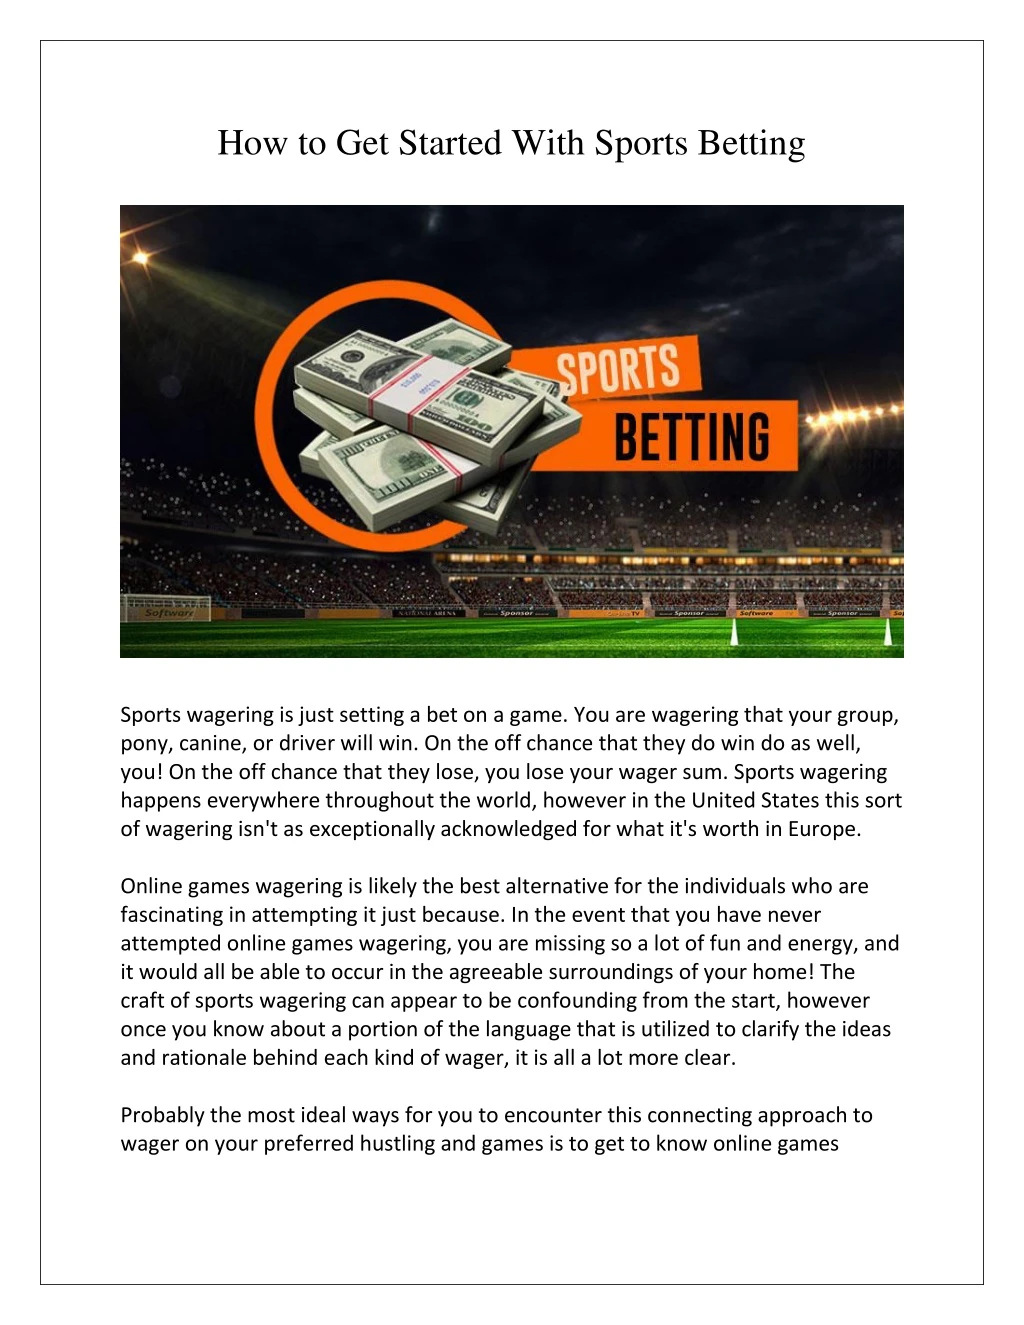 how to get started with sports betting